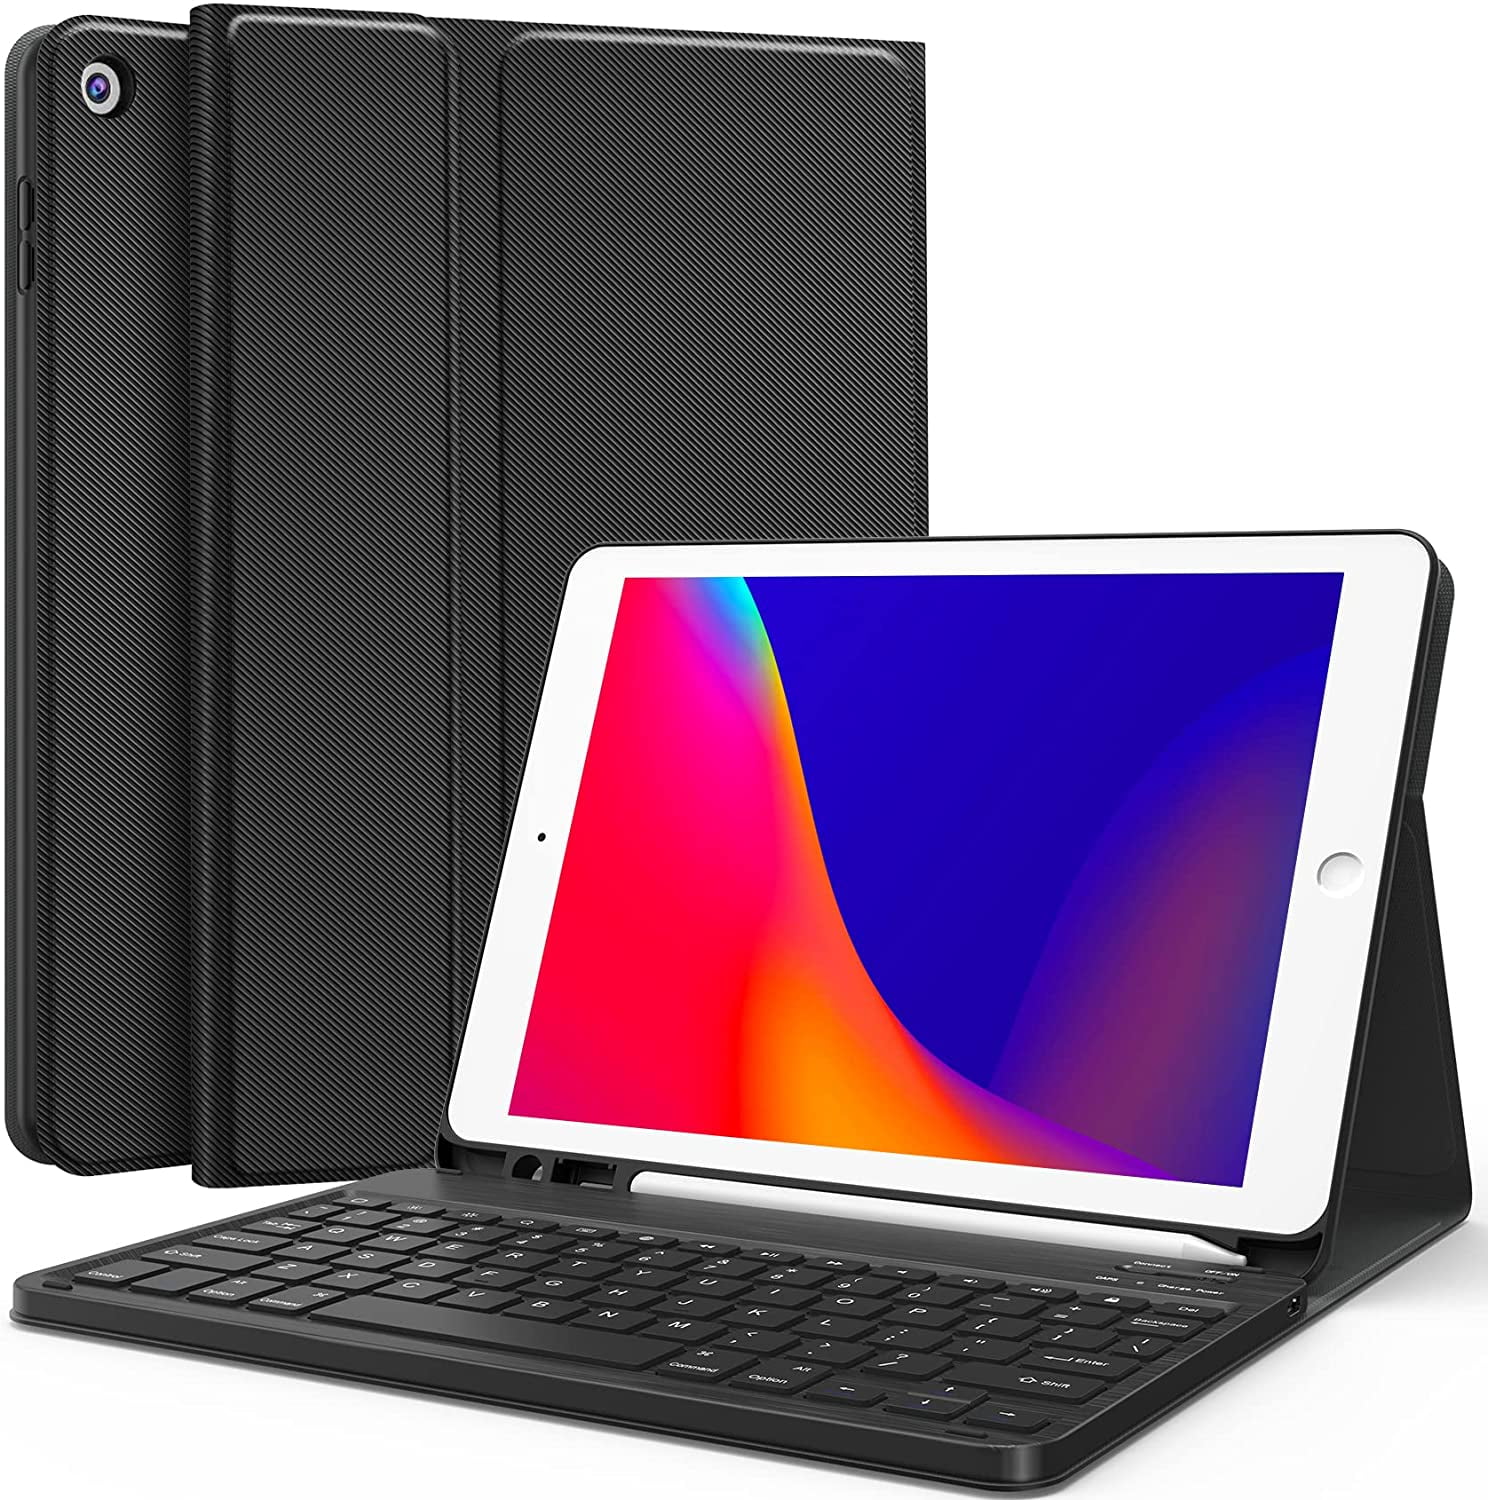 Case with Keyboard for iPad 10.2 2019 7th Generation Black Leather Case with Detachable Removable Rechargeable Wireless Keyboard Stand Cover for iPad 10.2 2019 7th Generation 